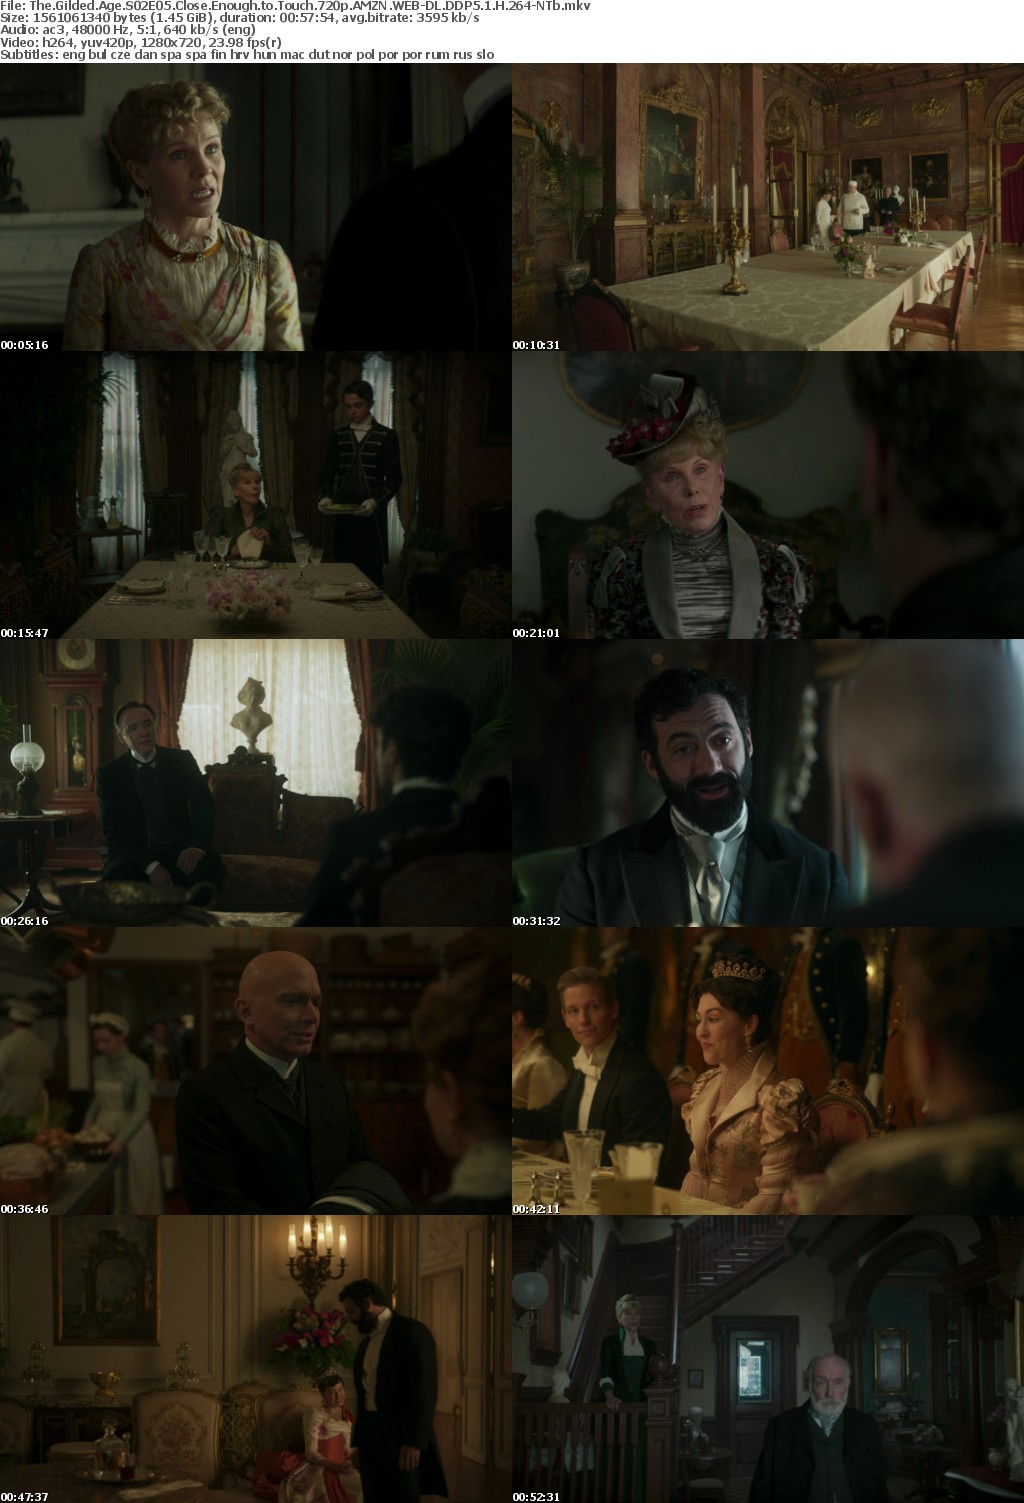 The Gilded Age S02E05 Close Enough to Touch 720p AMZN WEB-DL DDP5 1 H 264-NTb